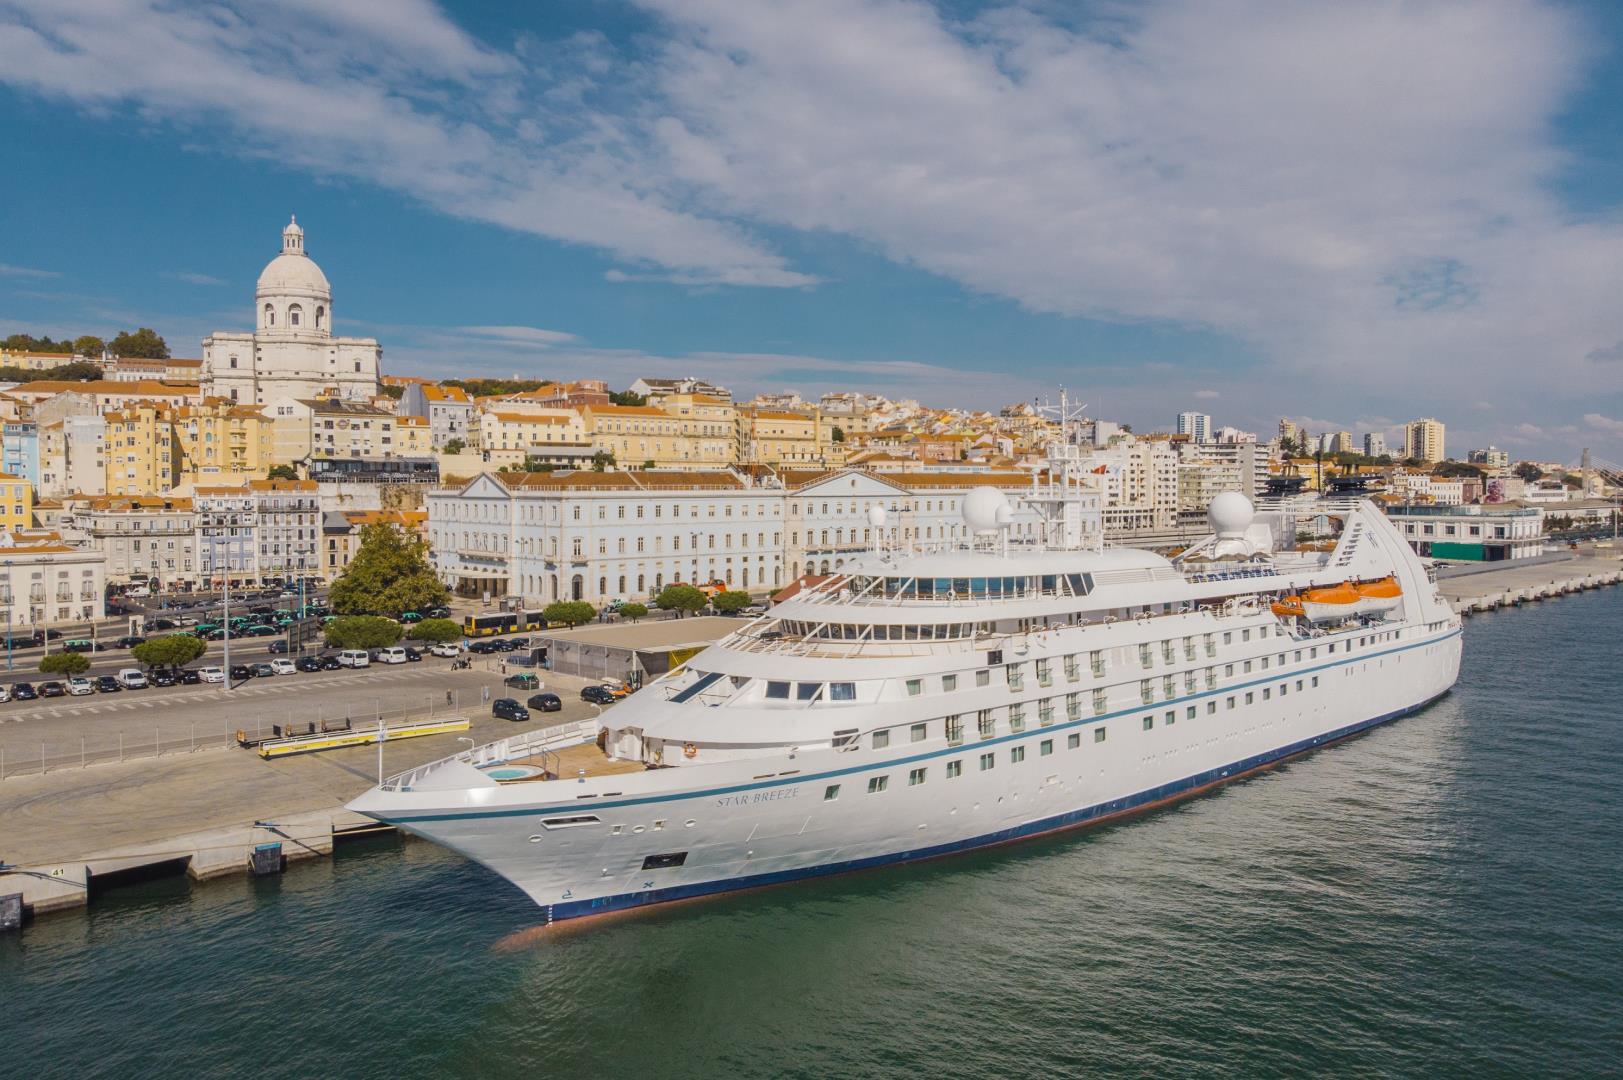 Exterior view of Star Breeze docked in Lisbon - Photo Credit: MoviePeople.ru